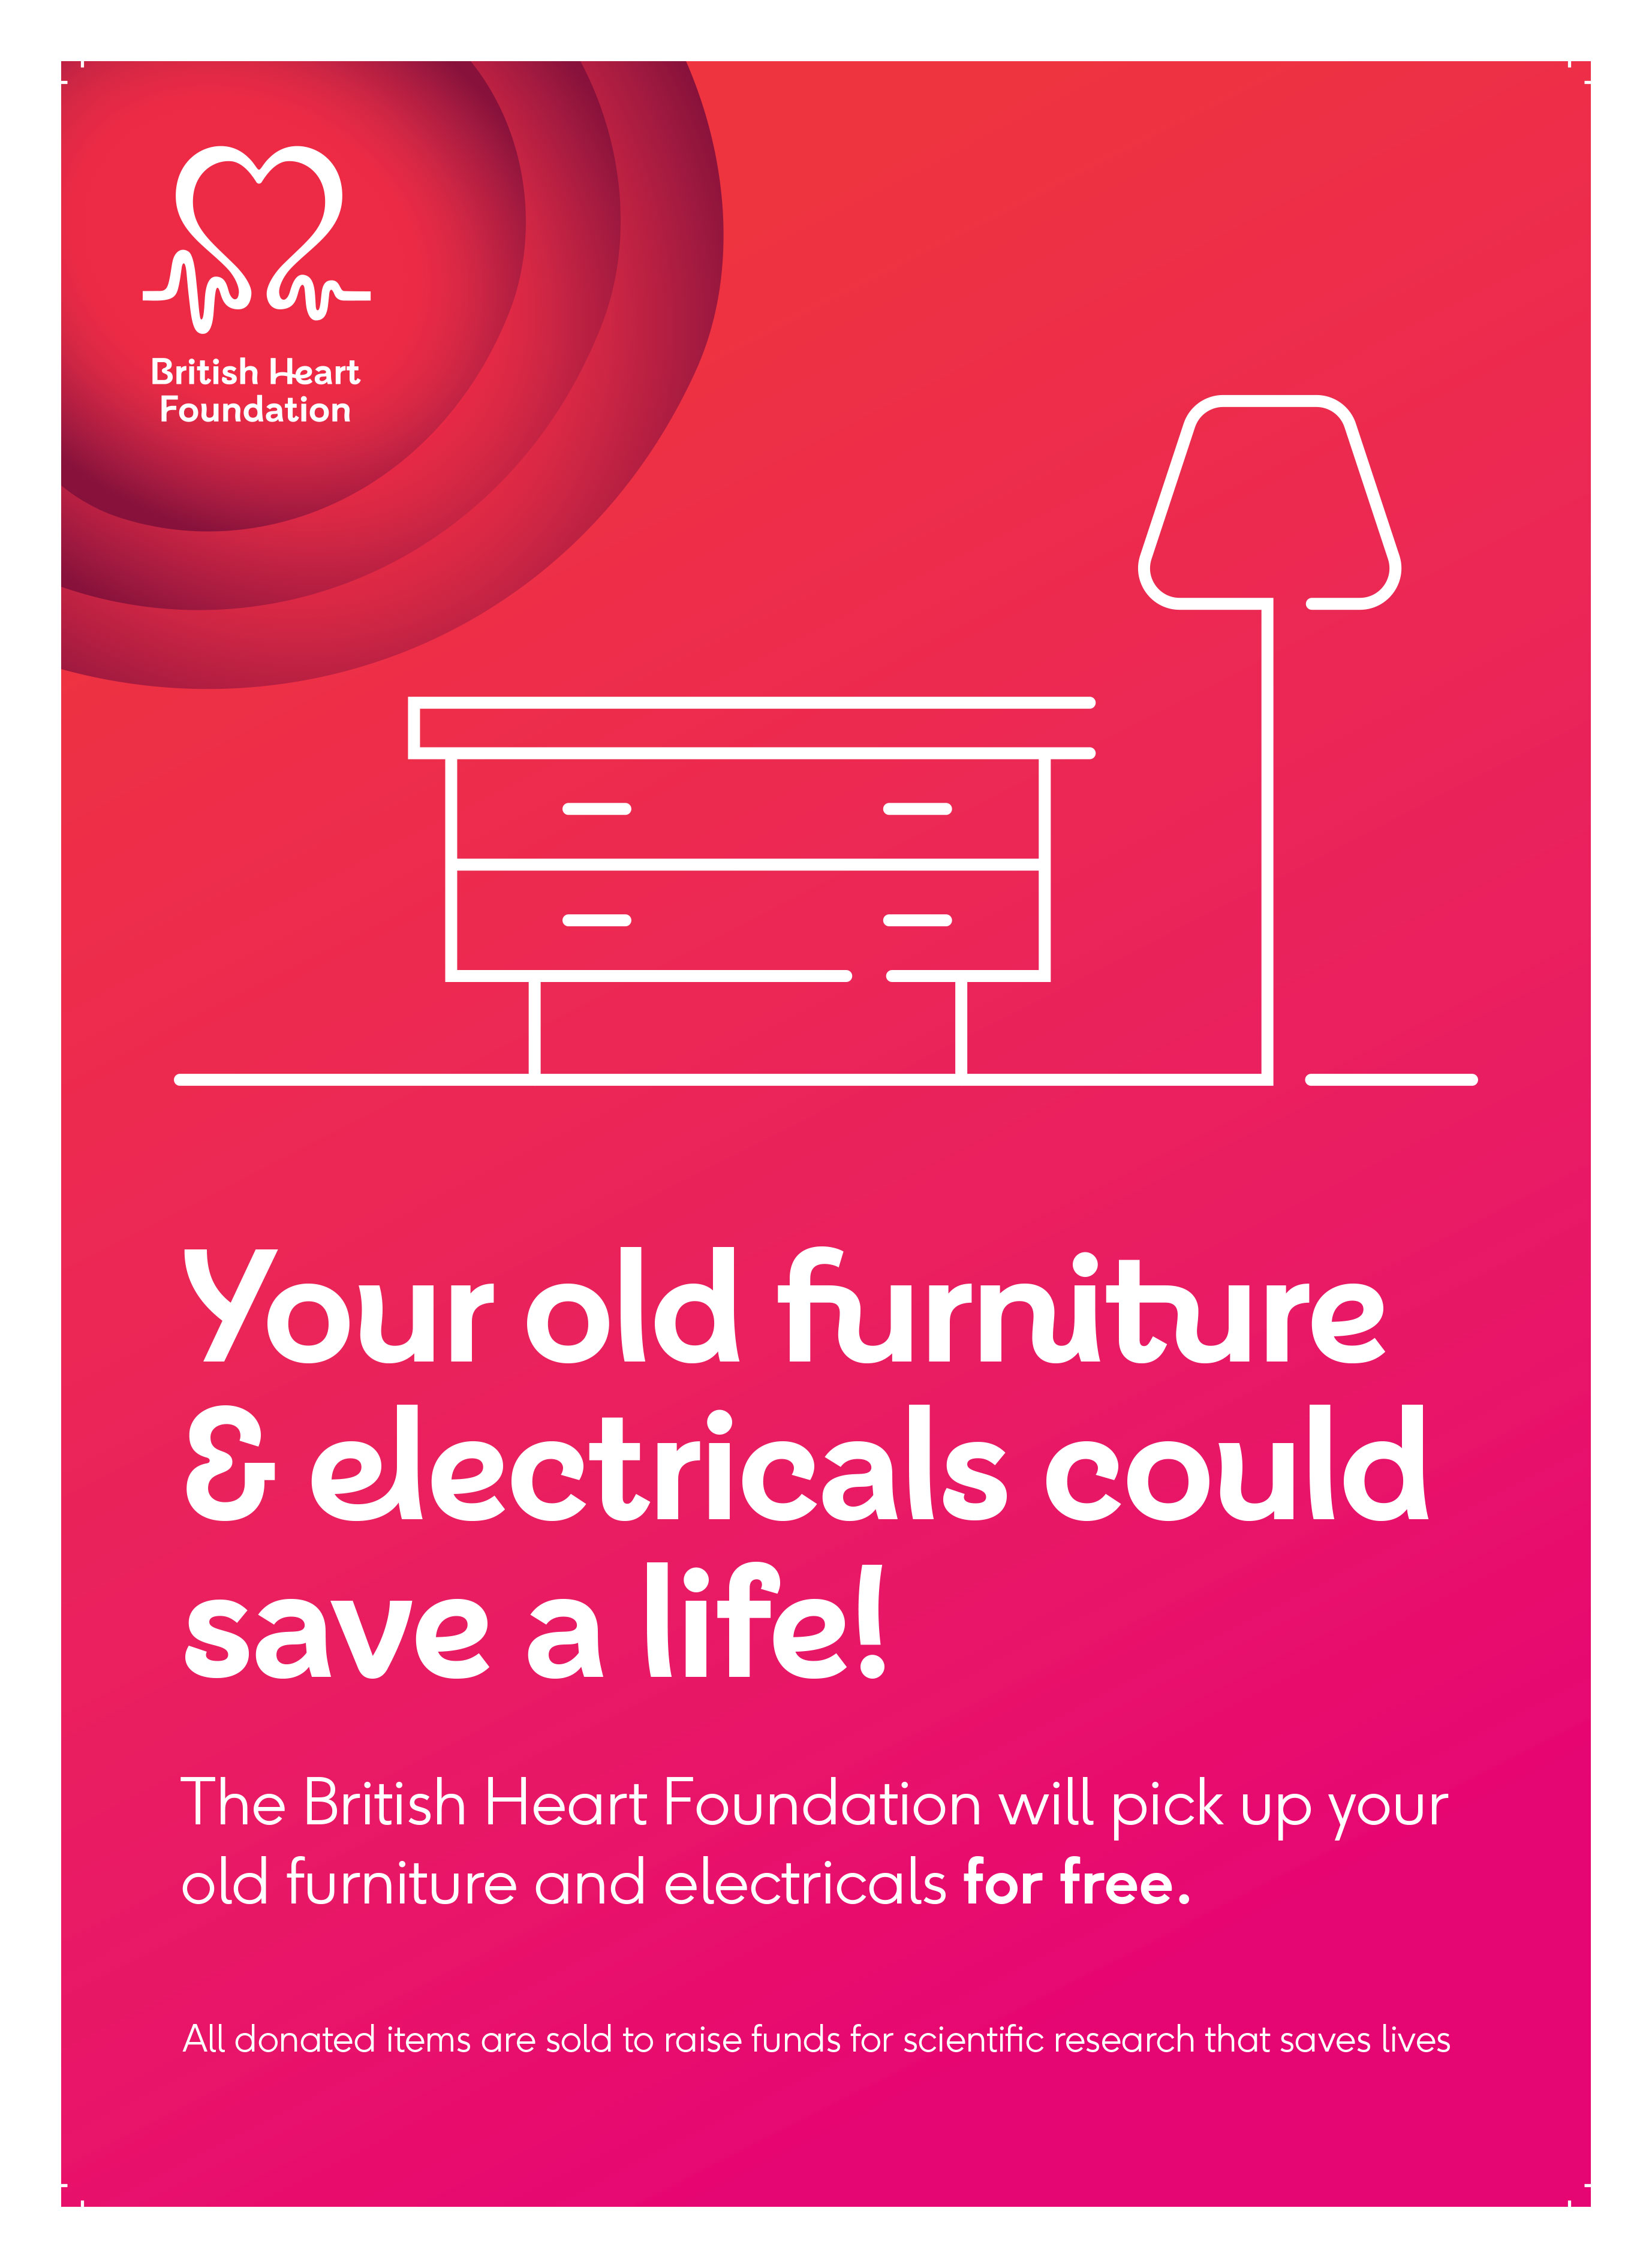 free collection poster from BHF